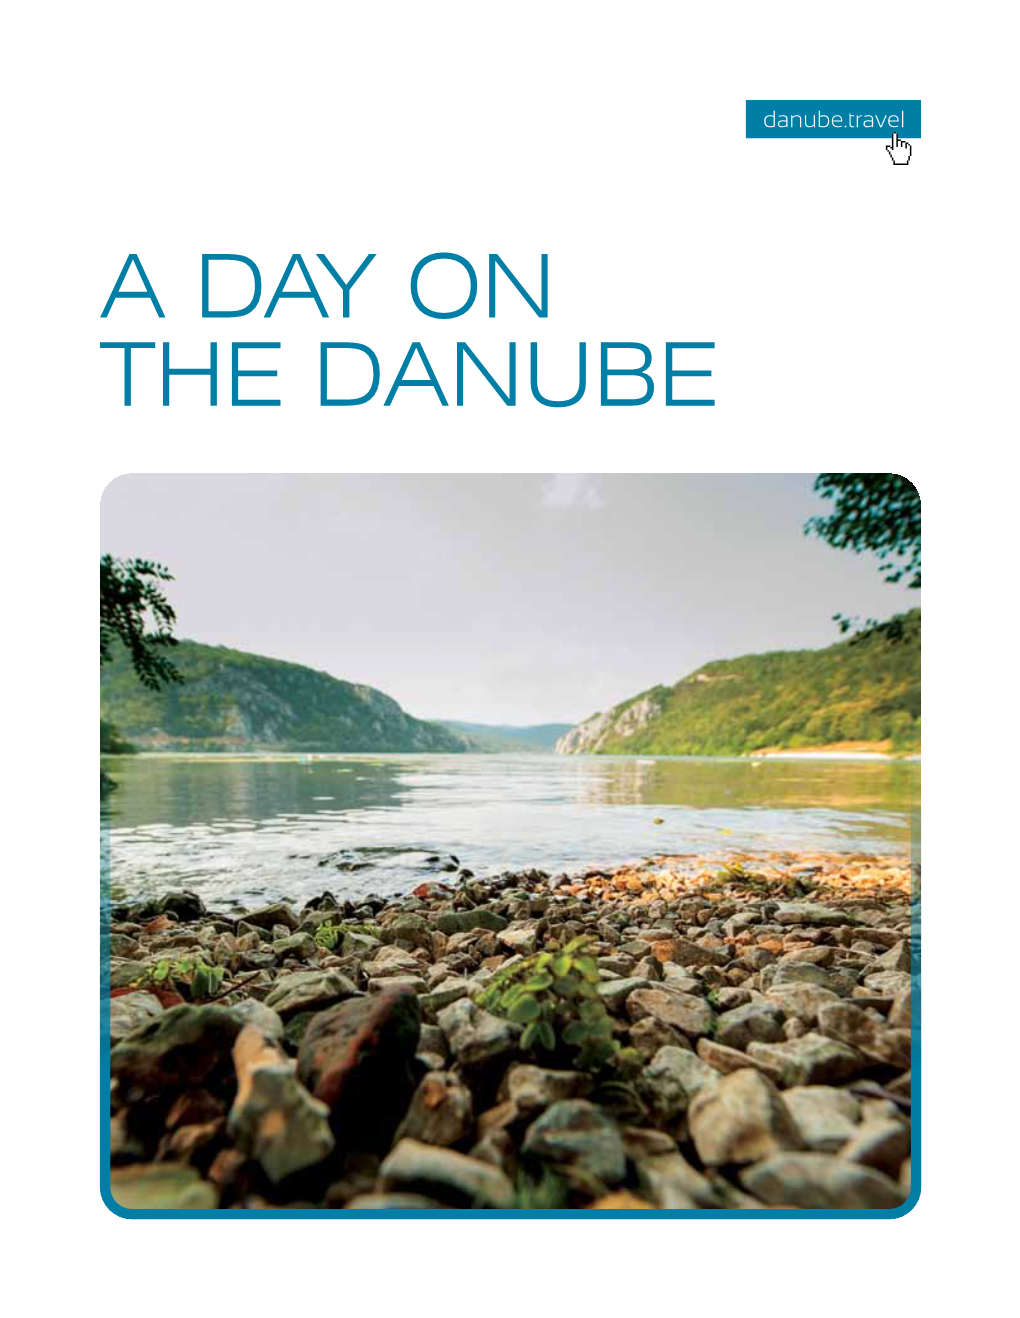 A Day on the Danube